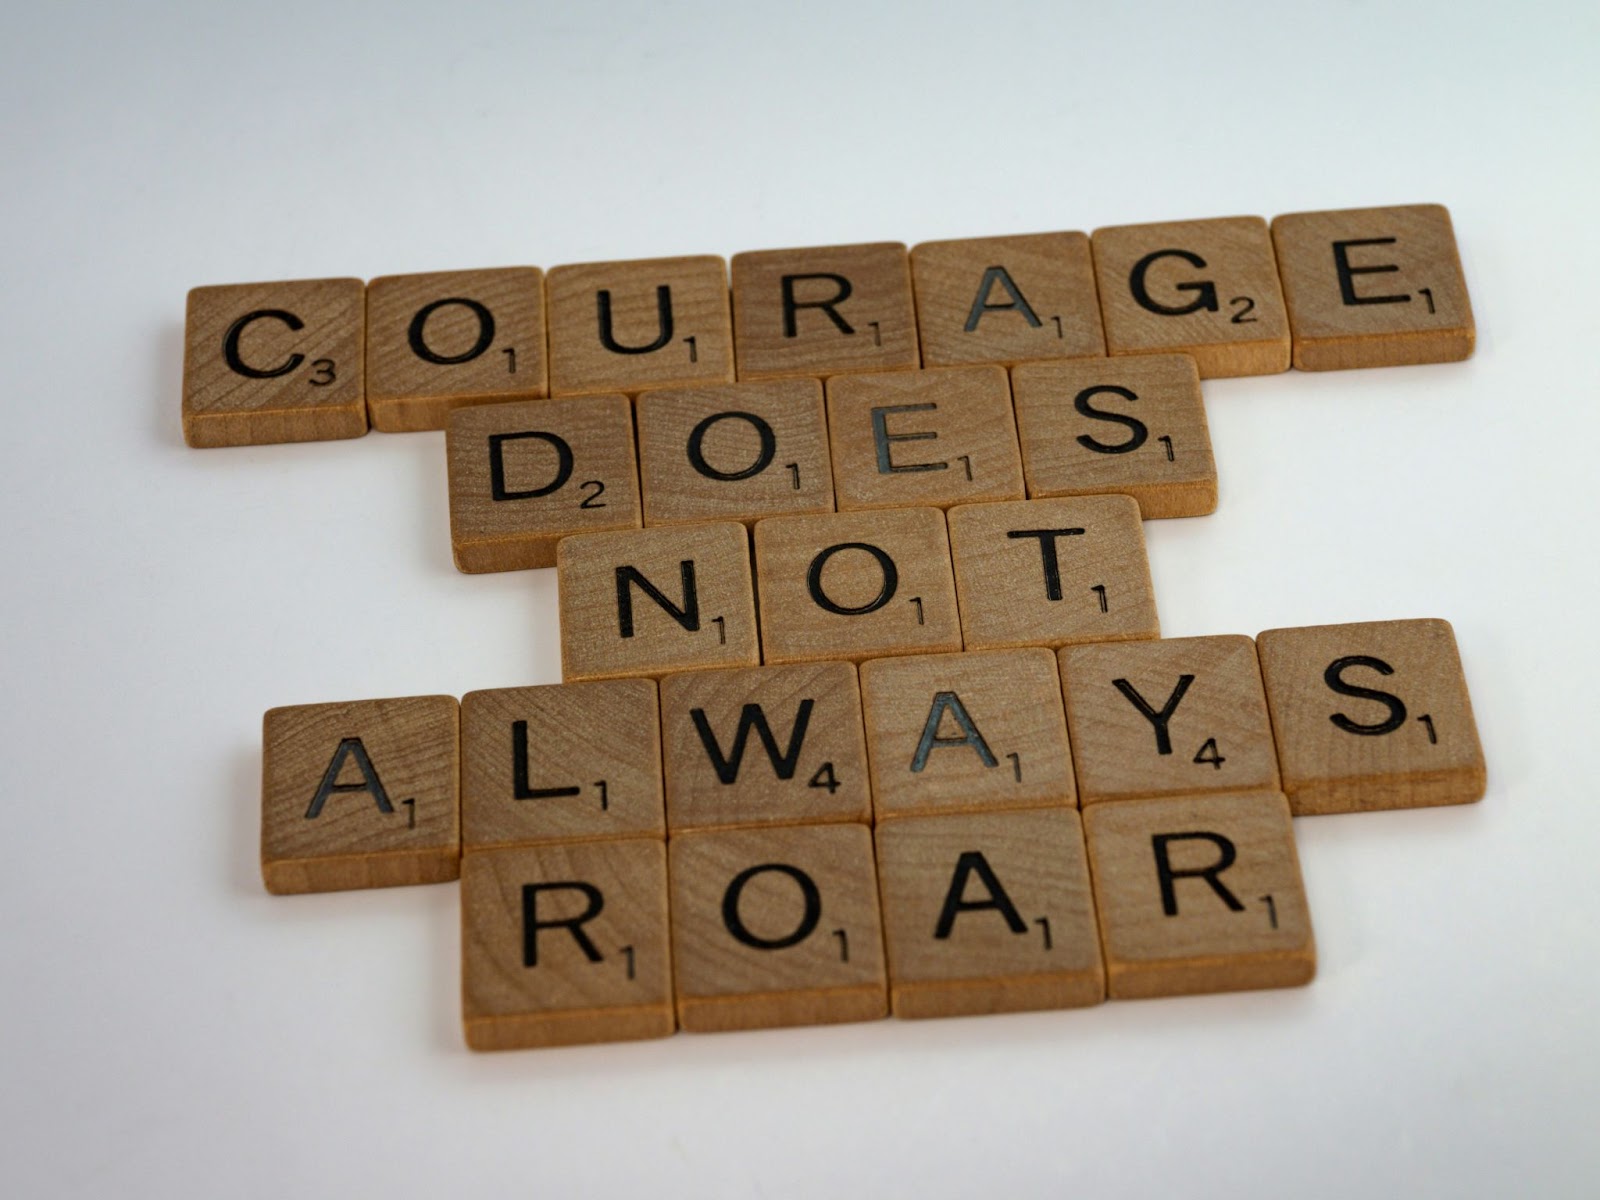 Scrabble tiles that says, "Courage does not always roar."